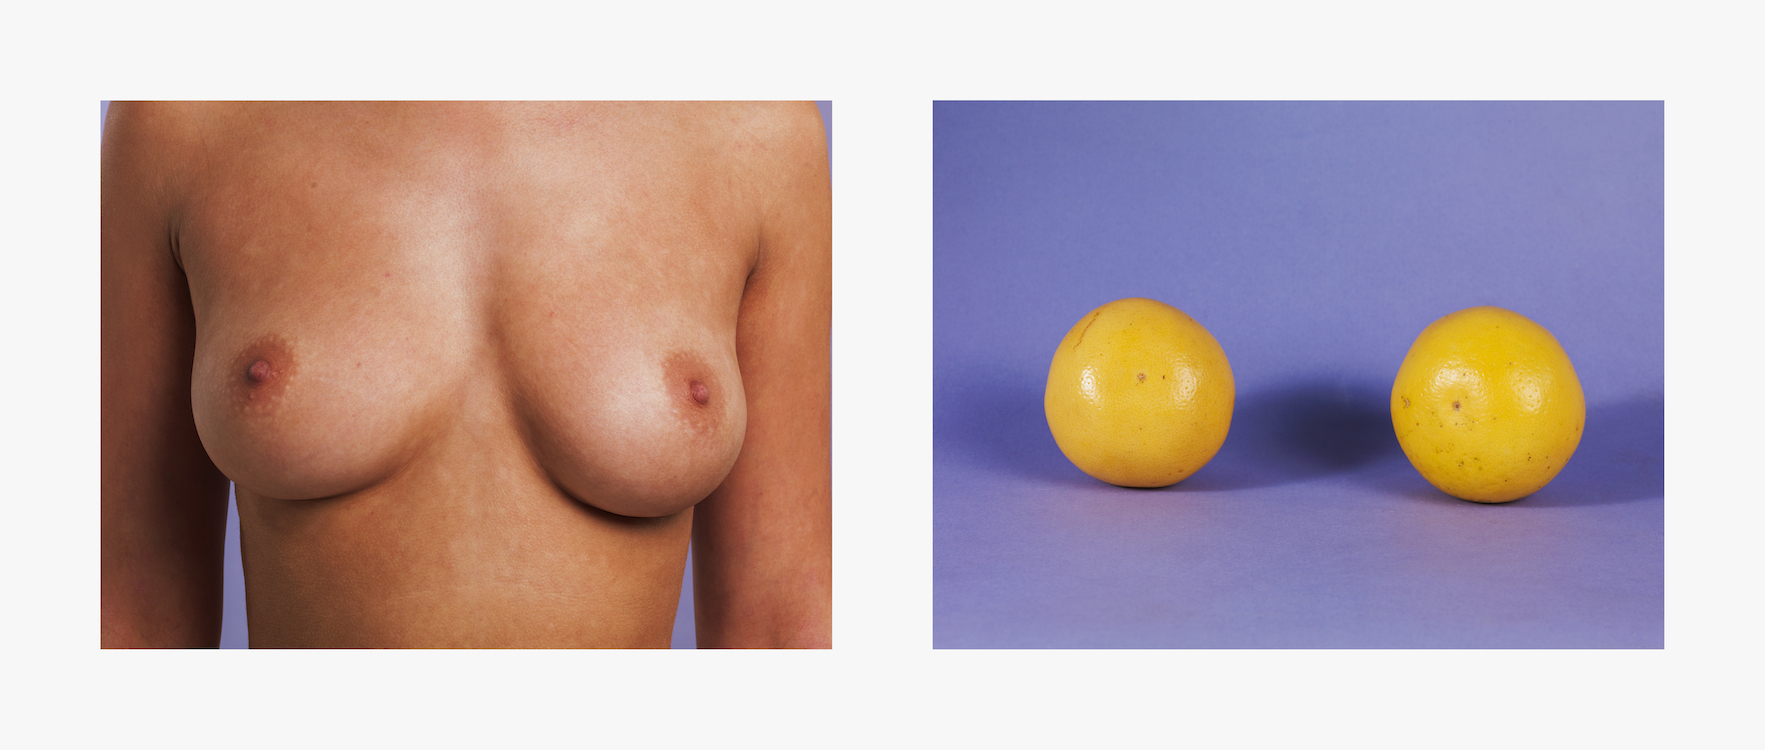 09-boobs-personal-work-charlotte-abramow-photography-paris-brussels